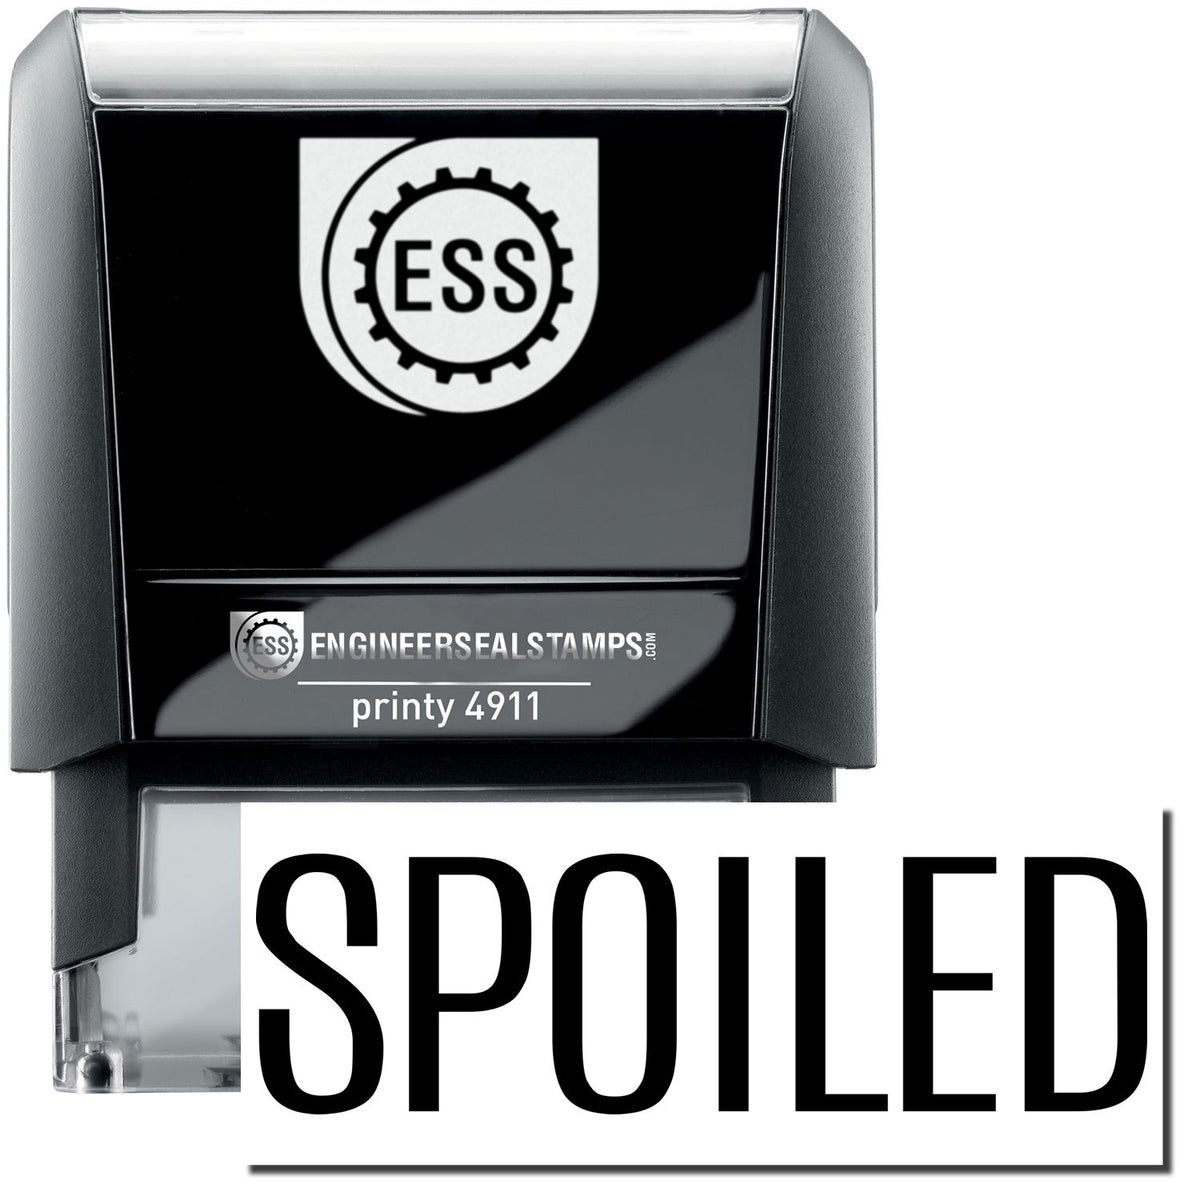 A self-inking stamp with a stamped image showing how the text &quot;SPOILED&quot; is displayed after stamping.